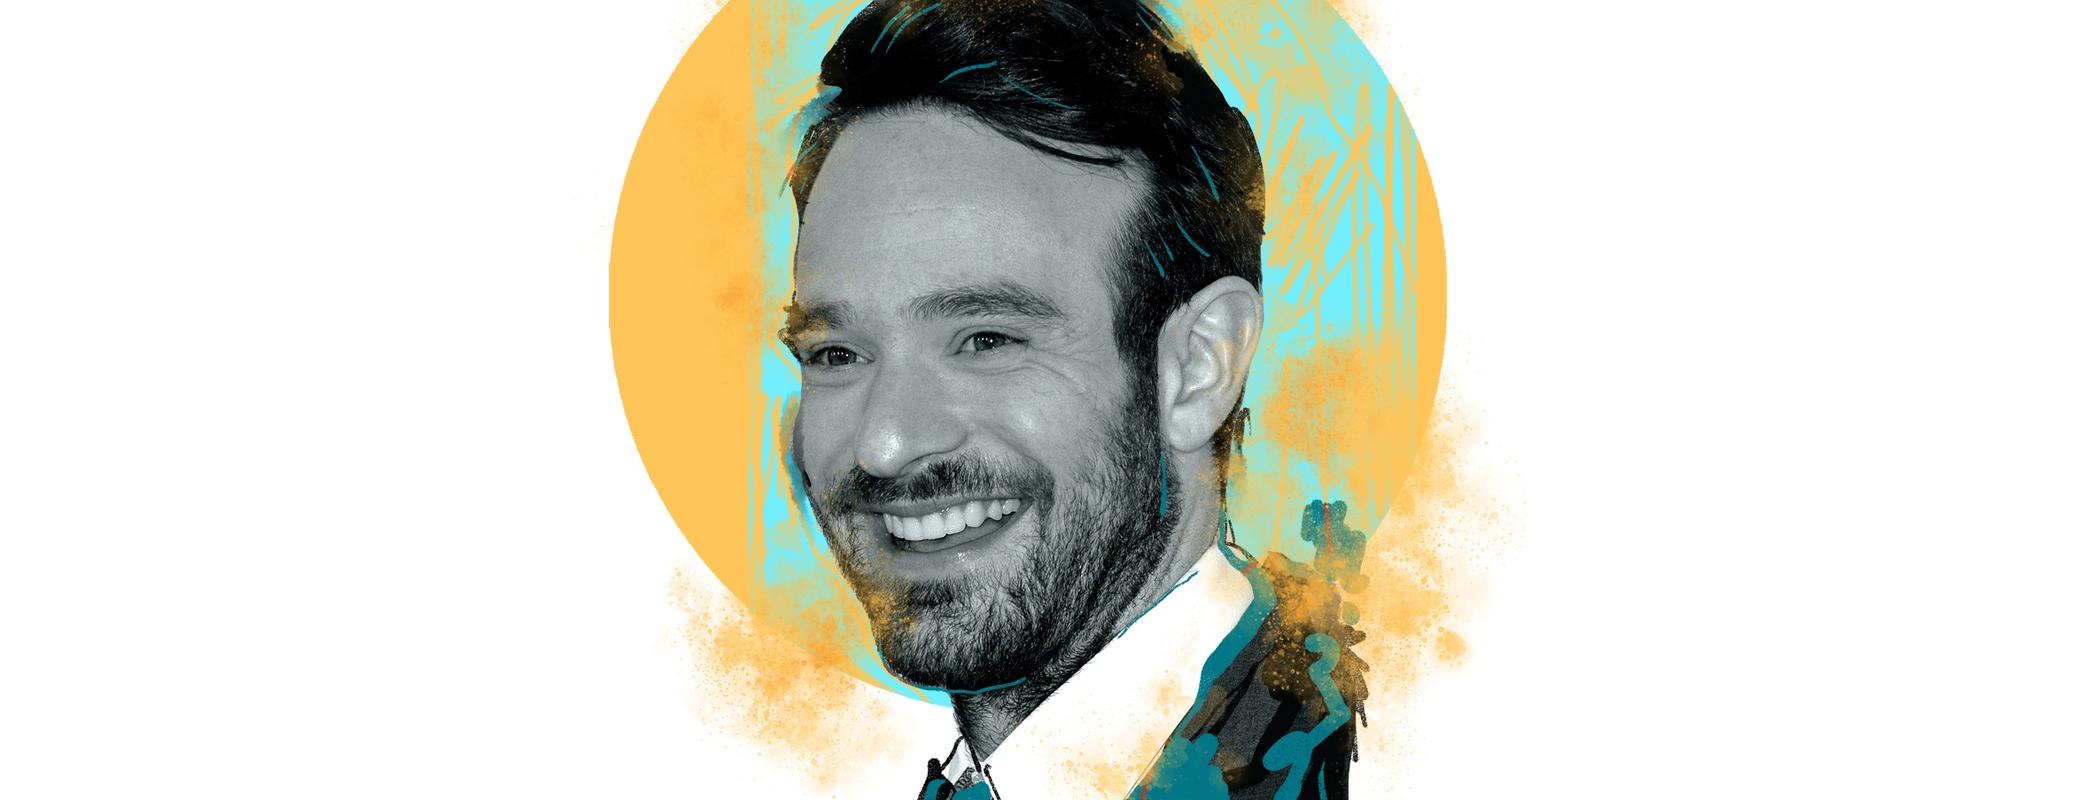 Charlie Cox on His Betrayal Broadway Debut + His Most Embarrassing Audition